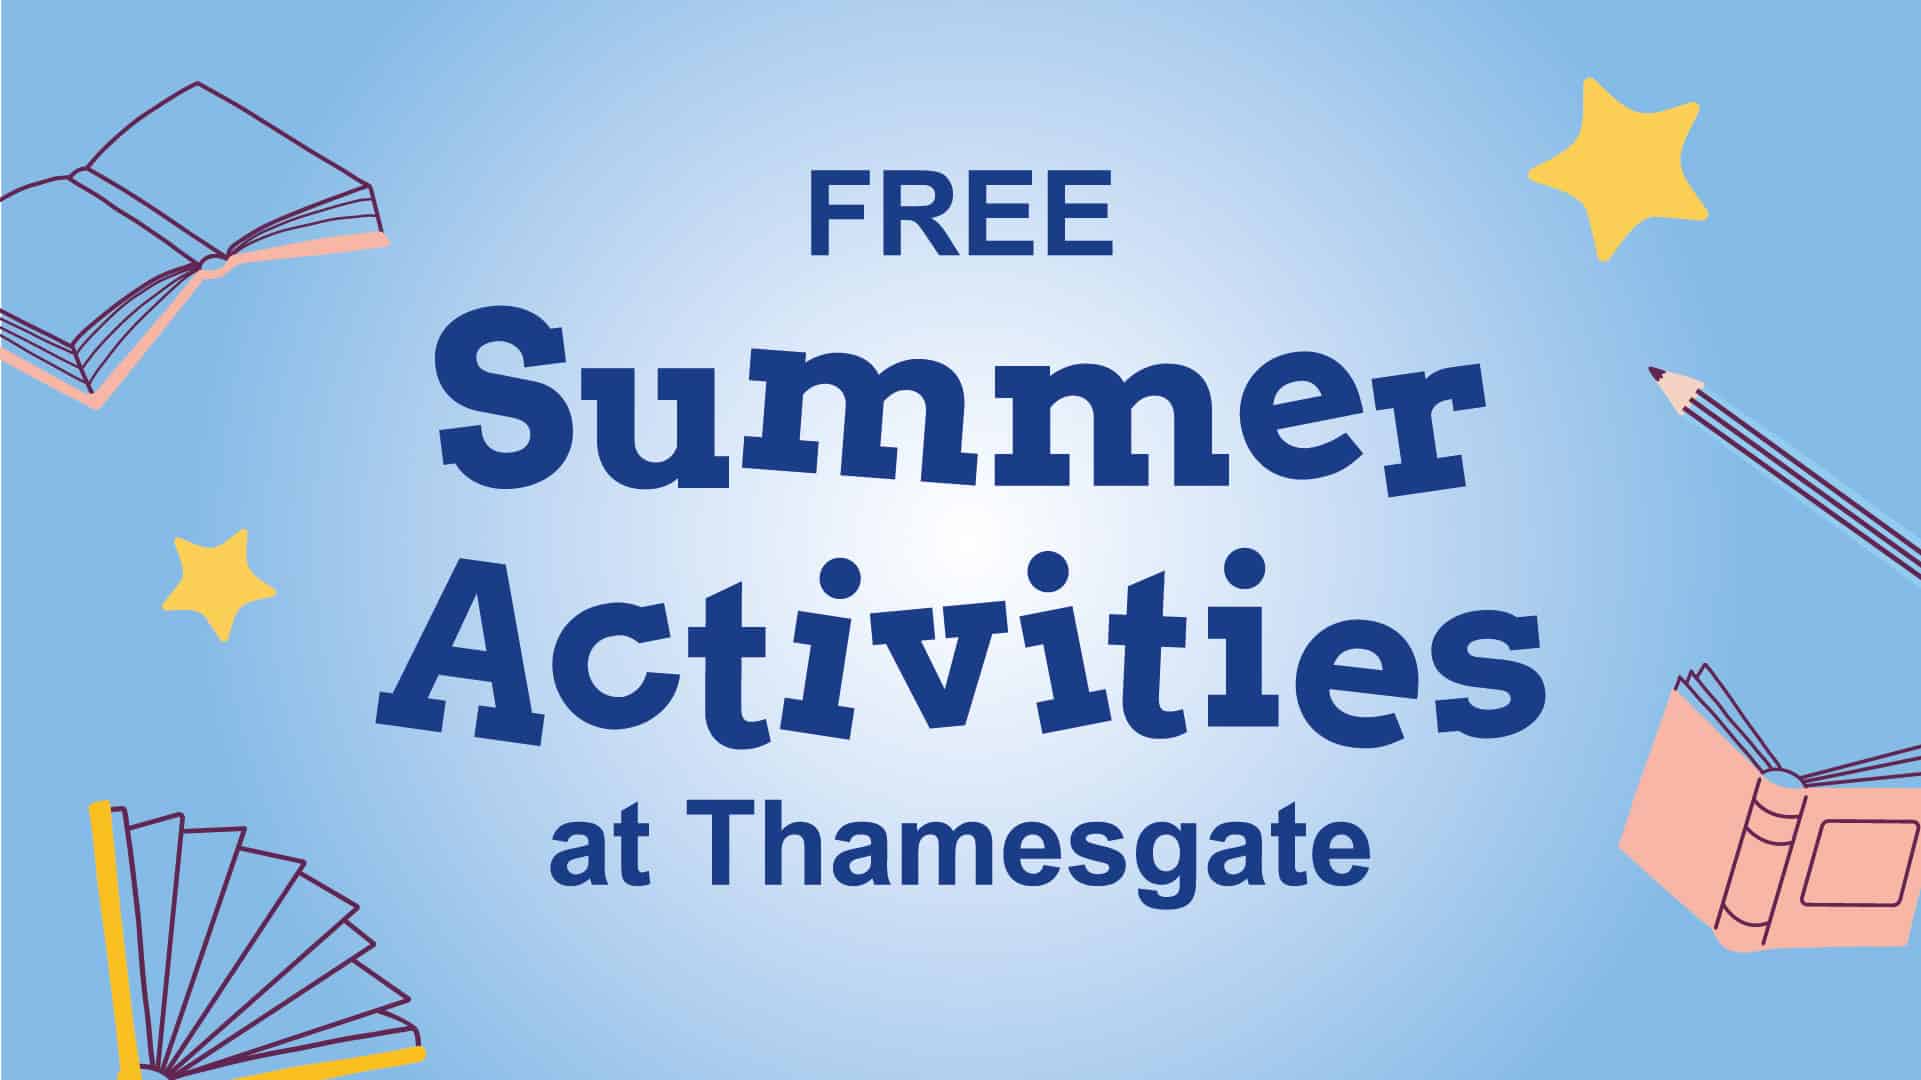 This August at Thamesgate